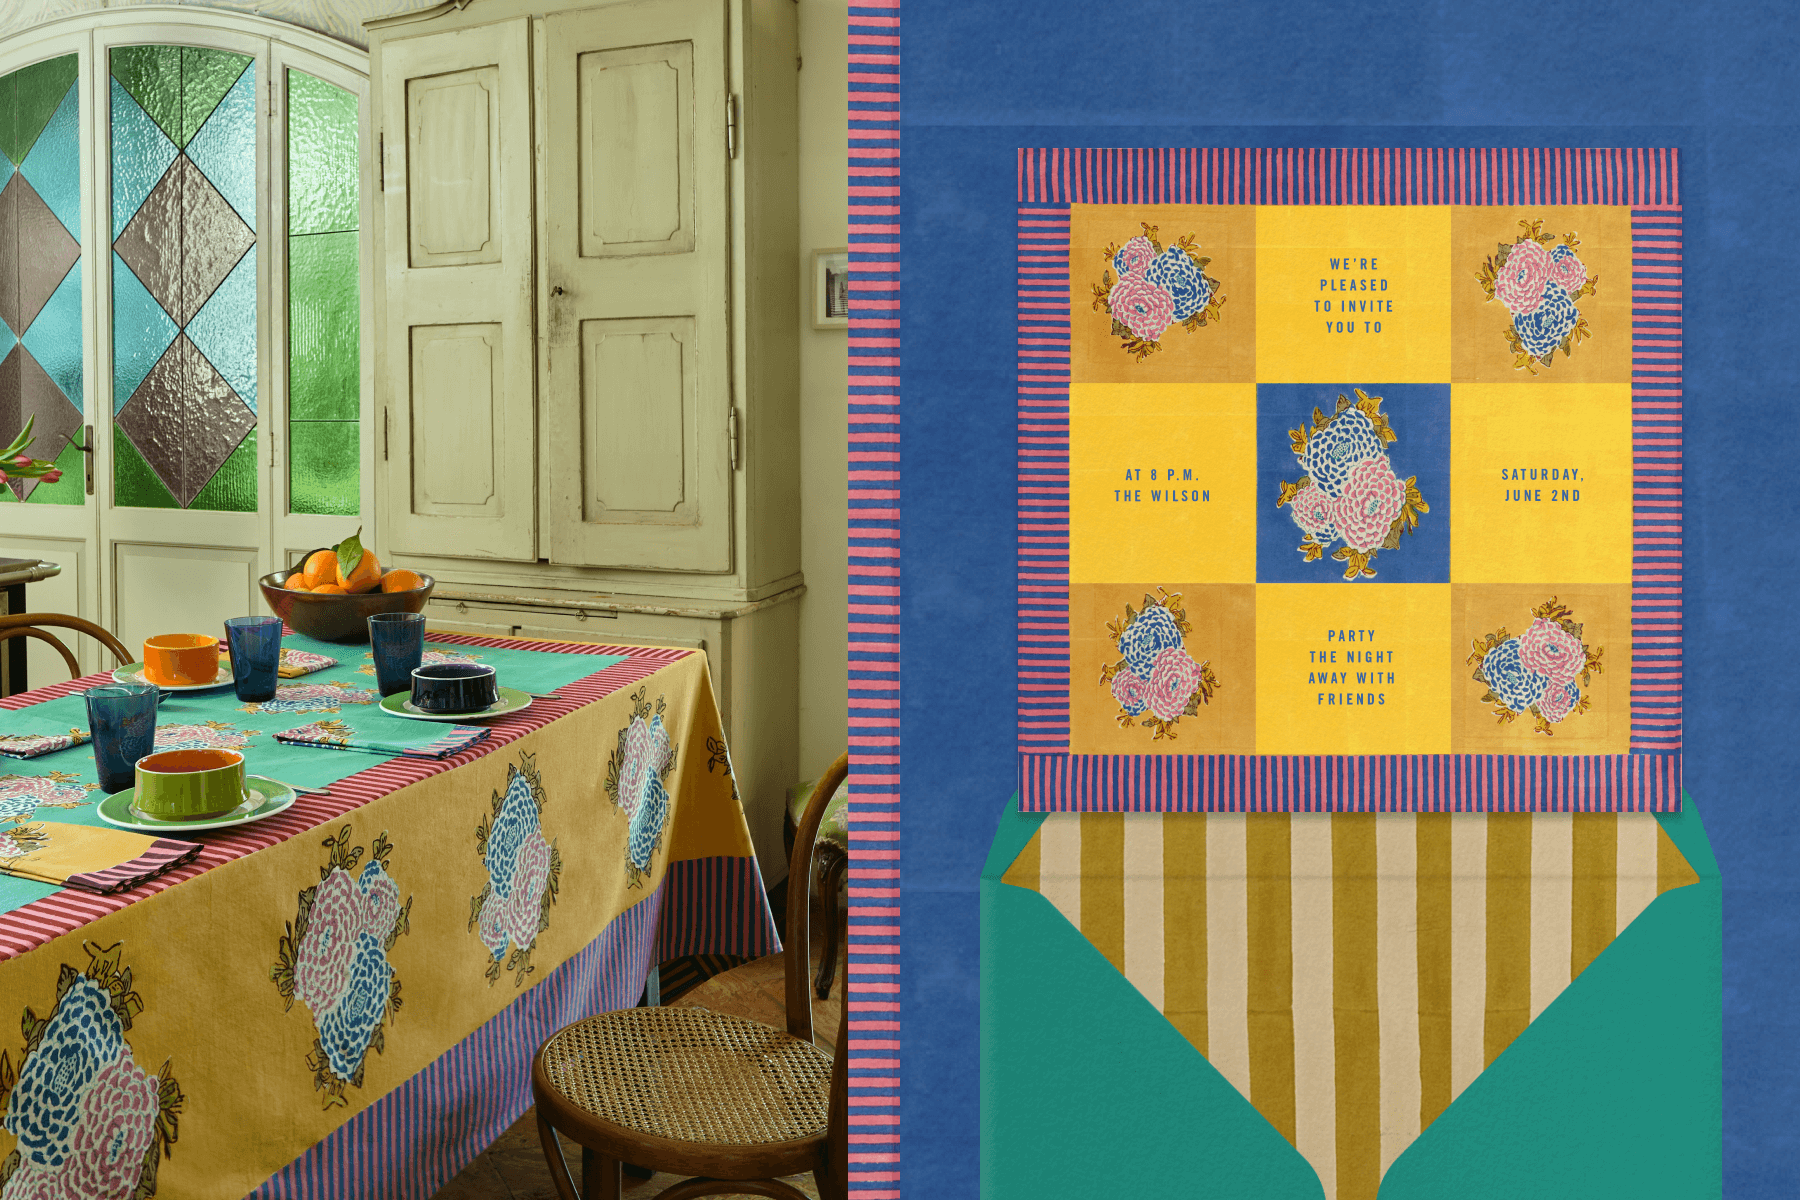 Left: Dining room with a table set with a yellow and green floral tablecloth. Right: Bright yellow invitation with floral design and pink and blue striped border. 